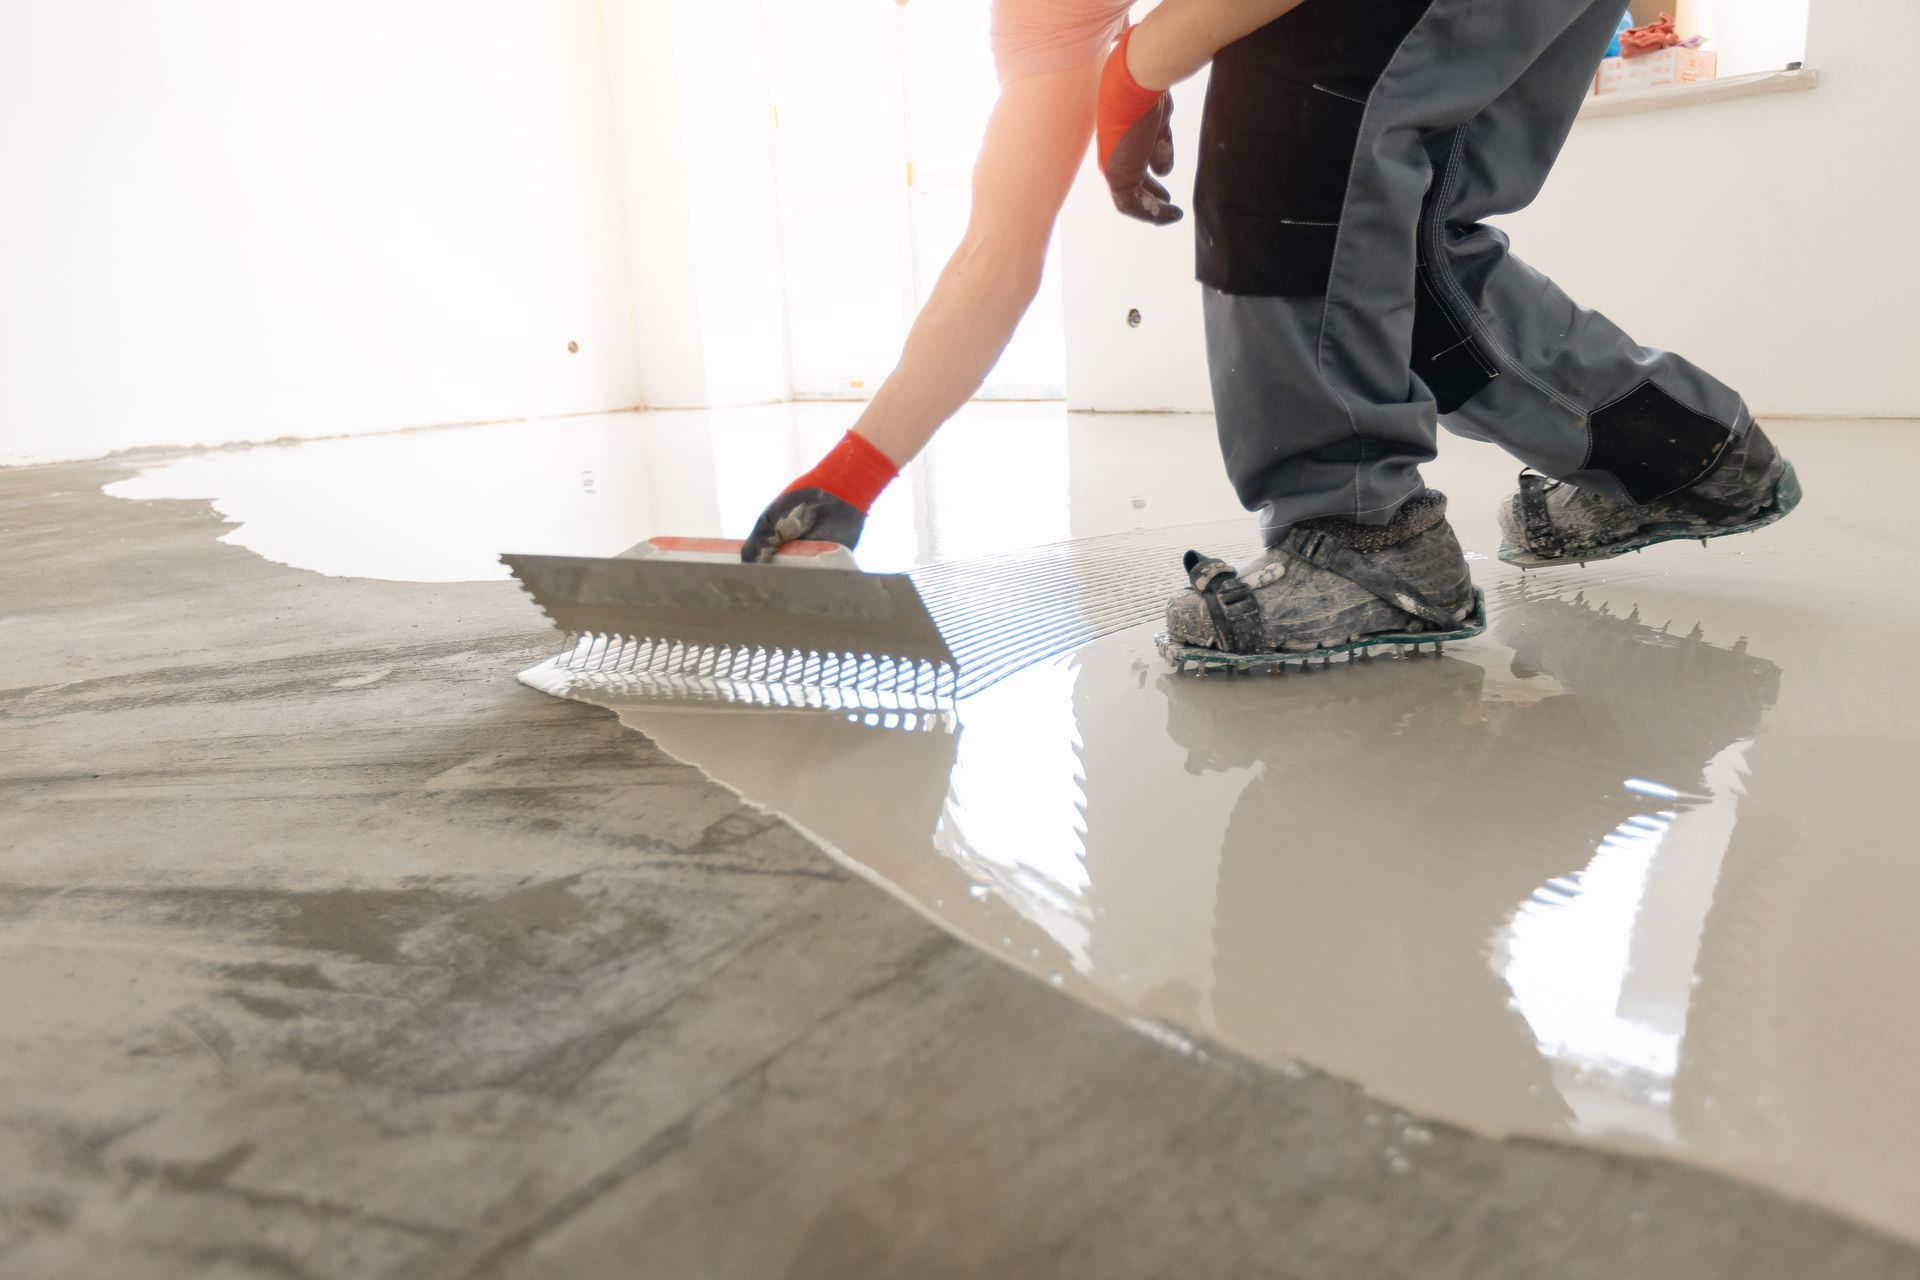 A man is spreading a concrete floor with a trowel.